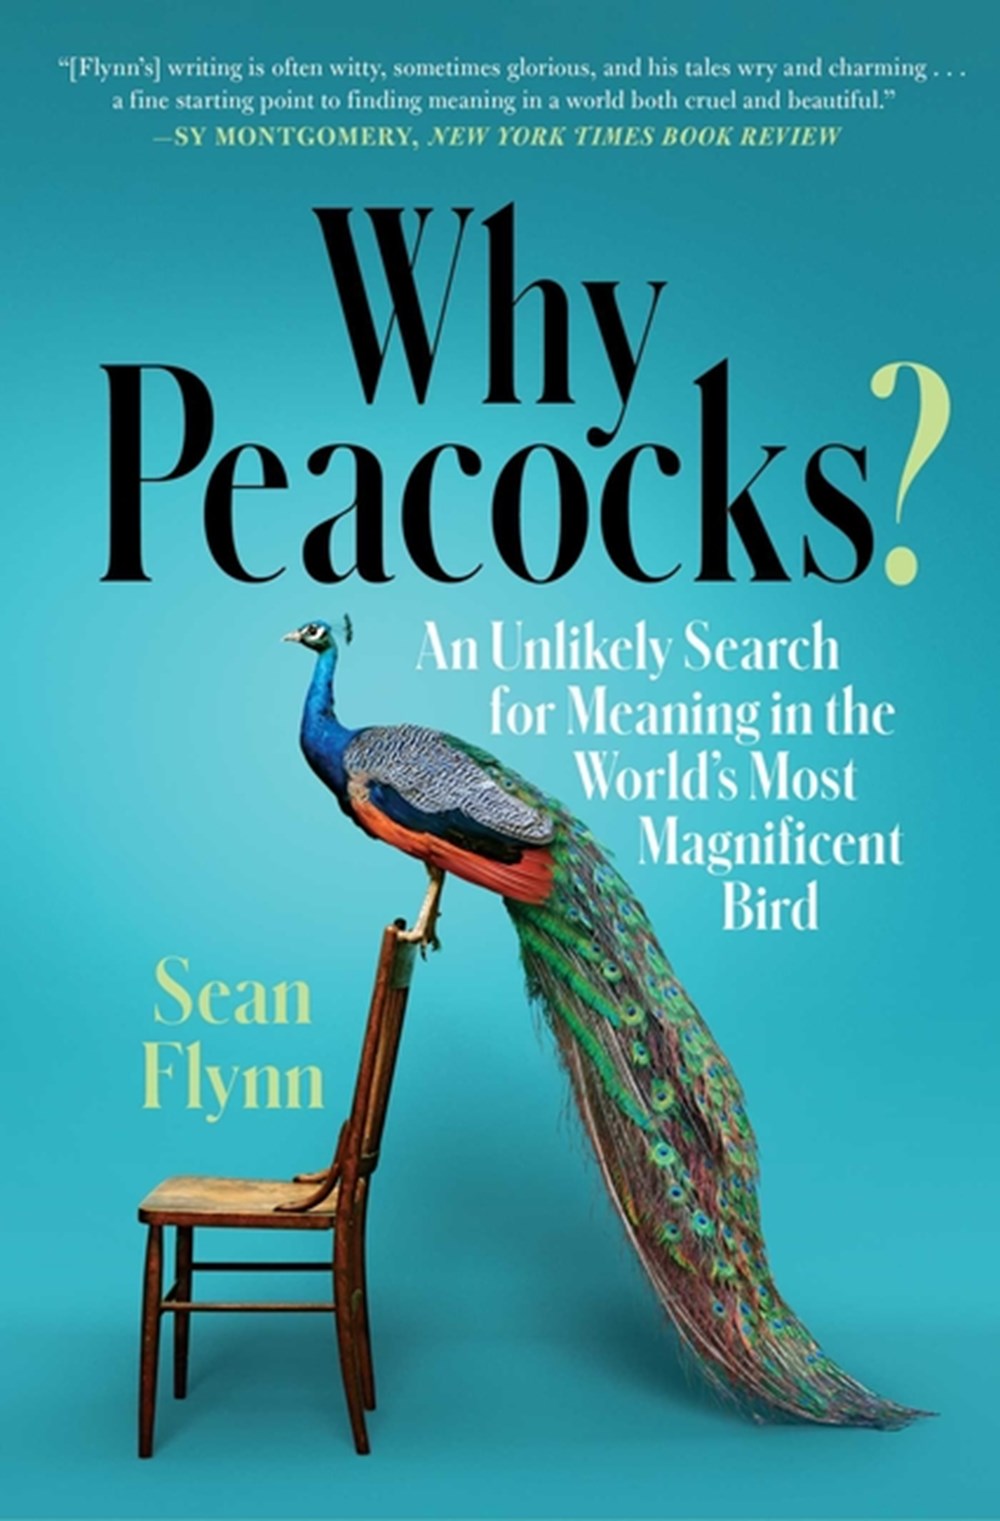 Why Peacocks? An Unlikely Search for Meaning in the World's Most Magnificent Bird